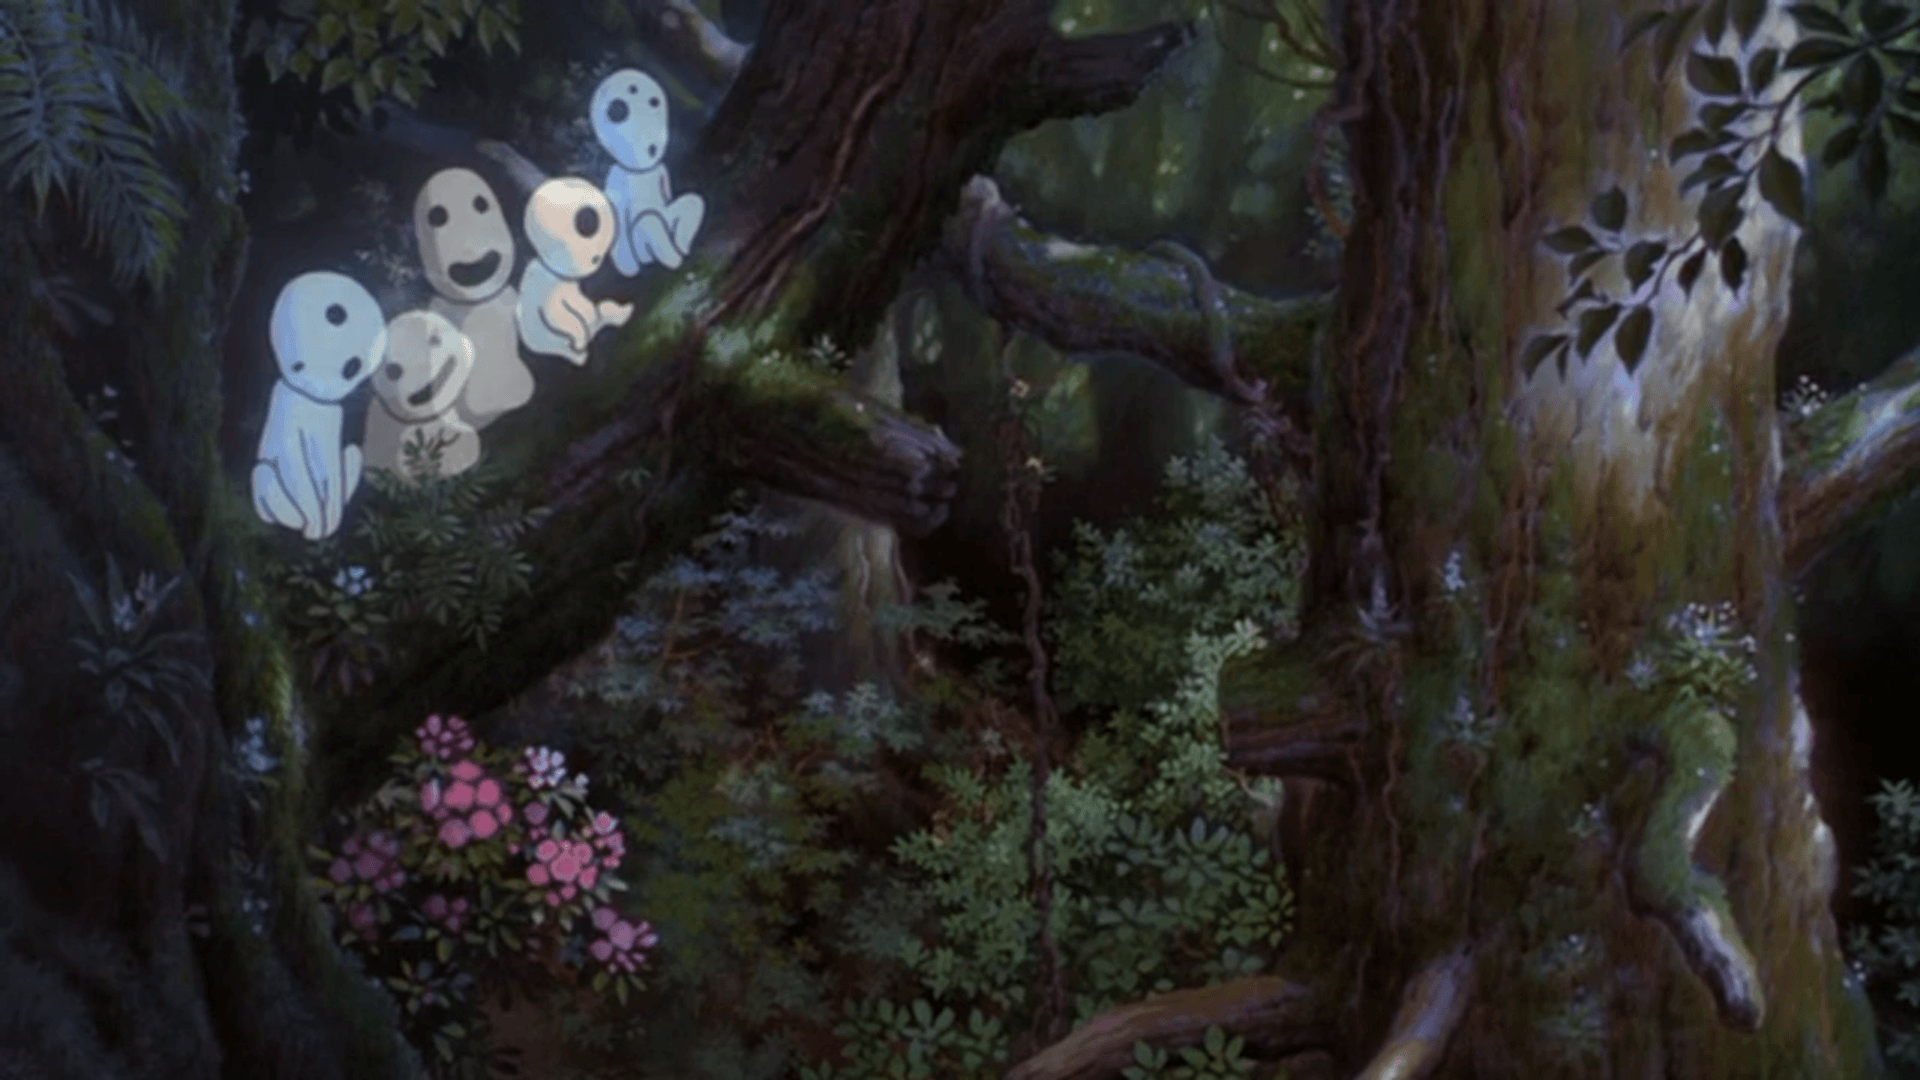 I want a cluster of kodama on a branch, I think, and perhaps some